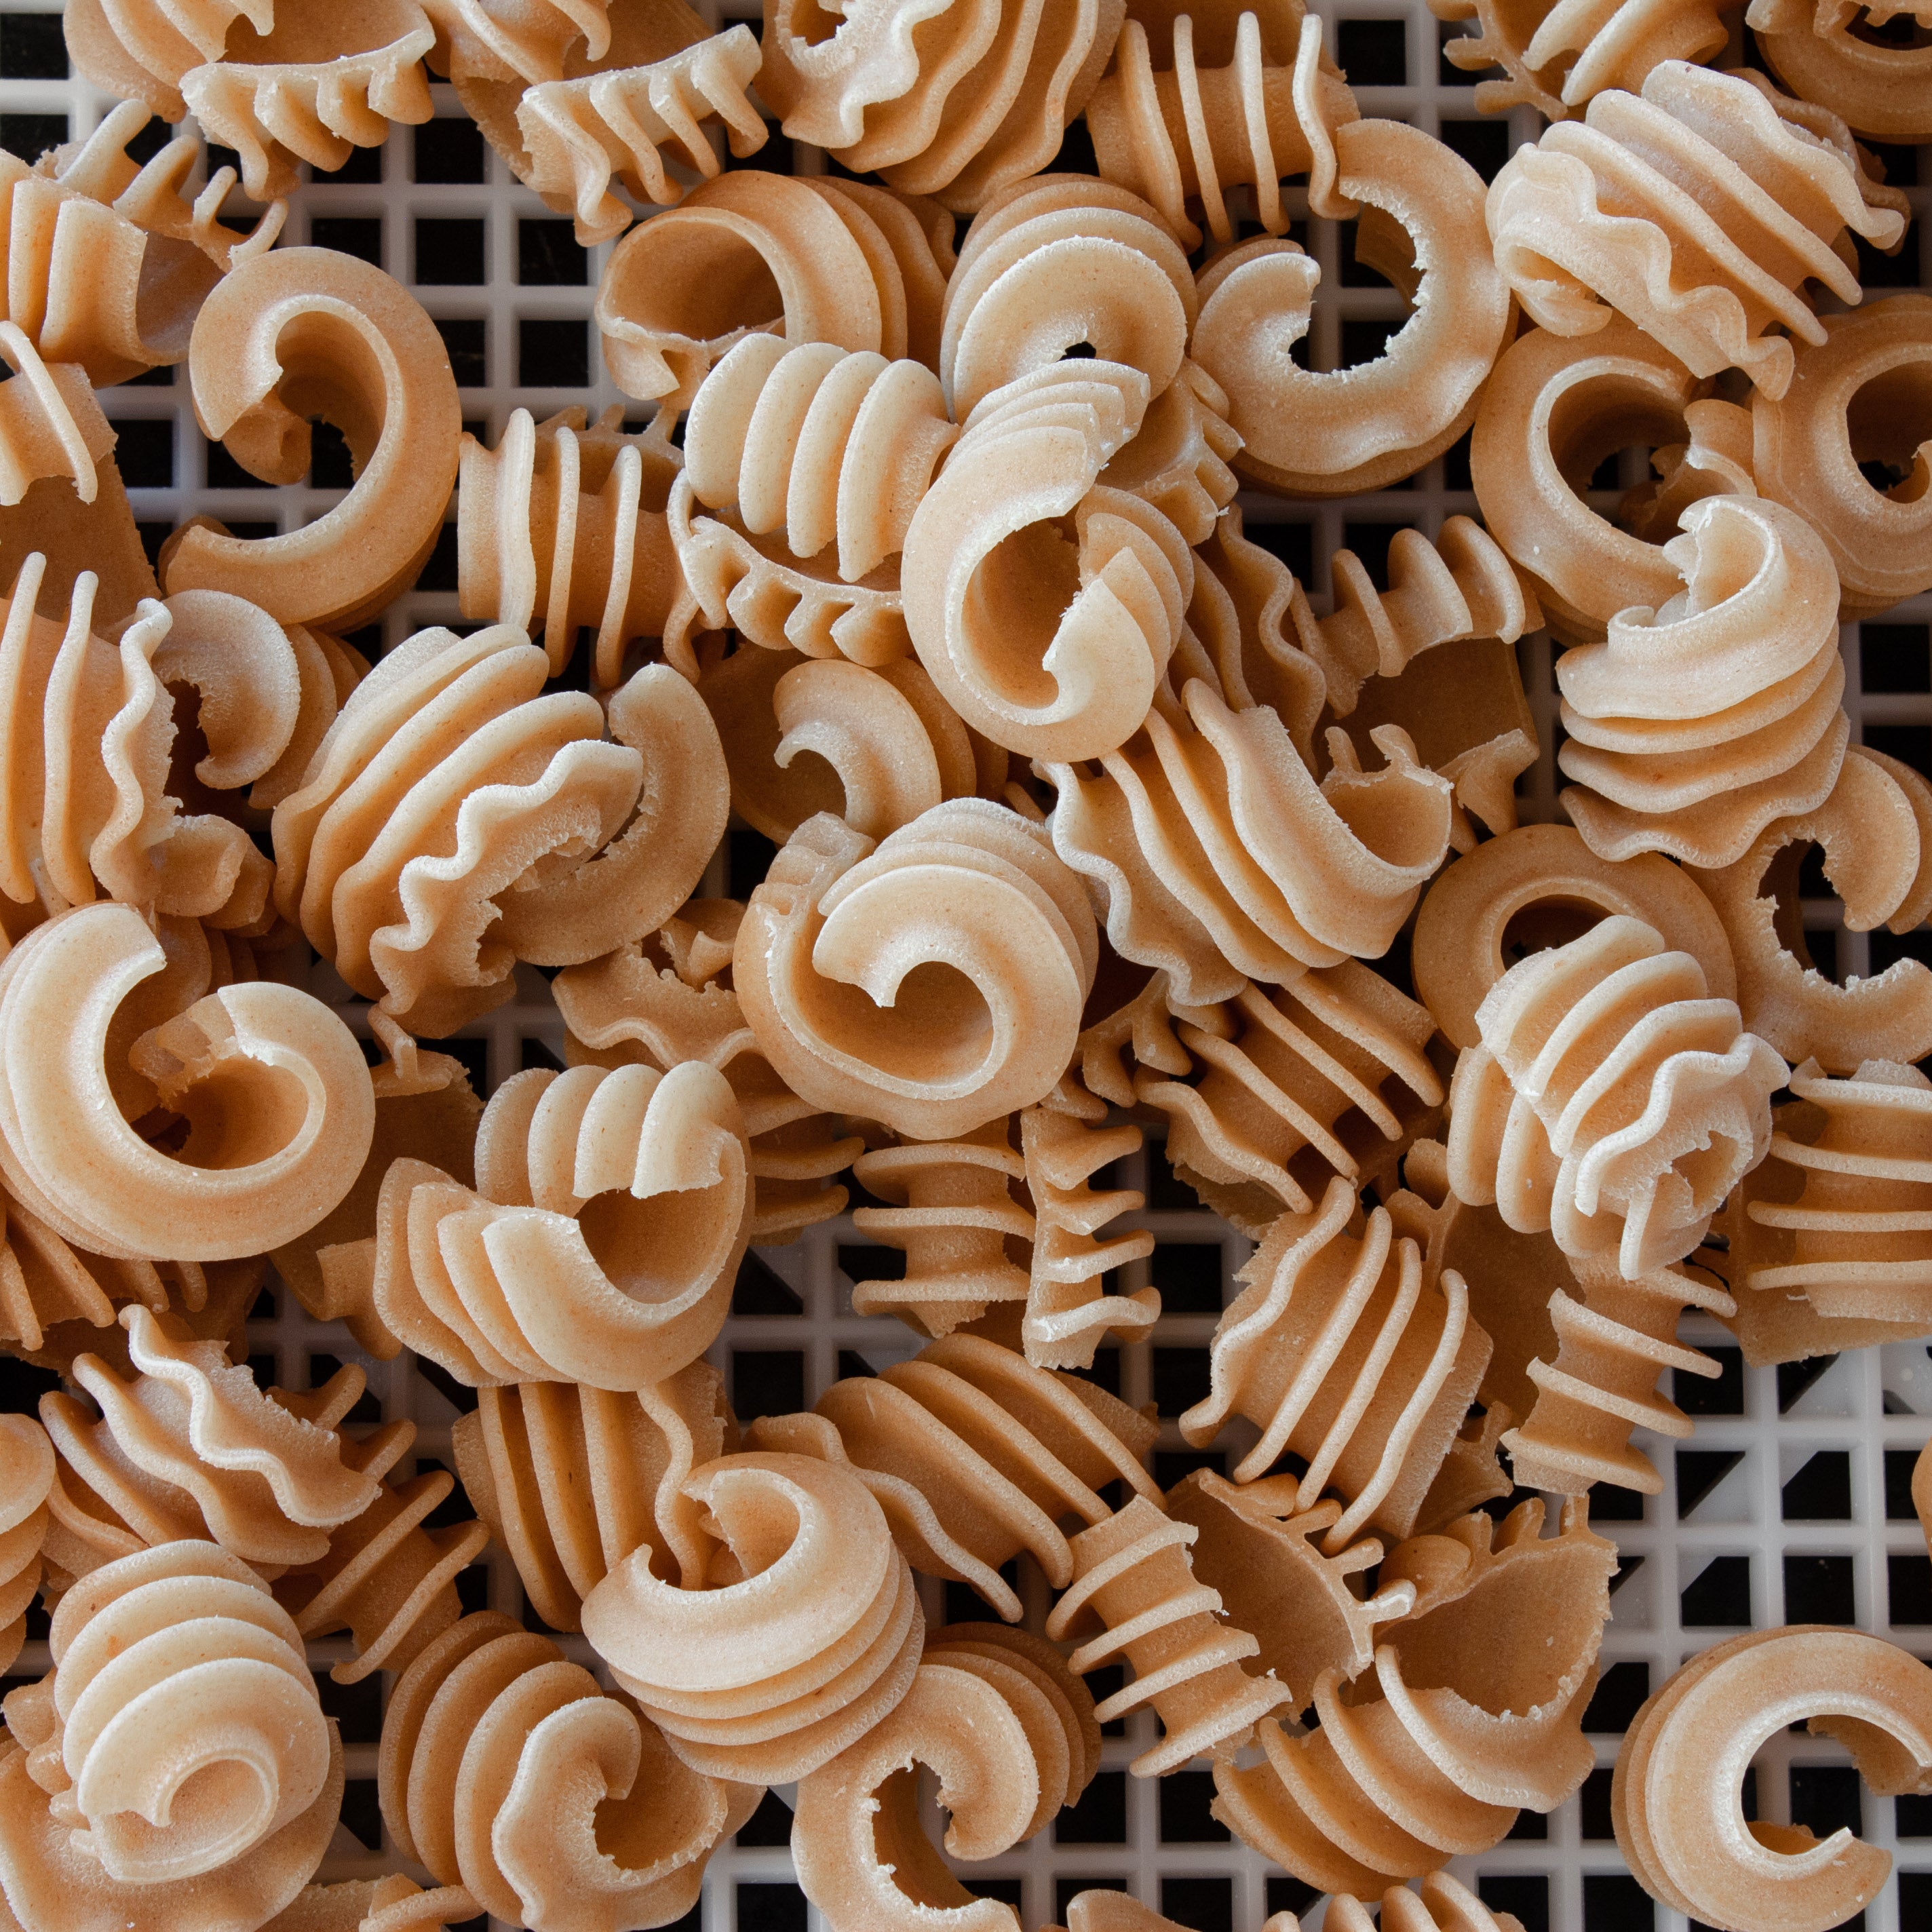 Radiatori fresh pasta made in vermont by Trenchers Farmhouse